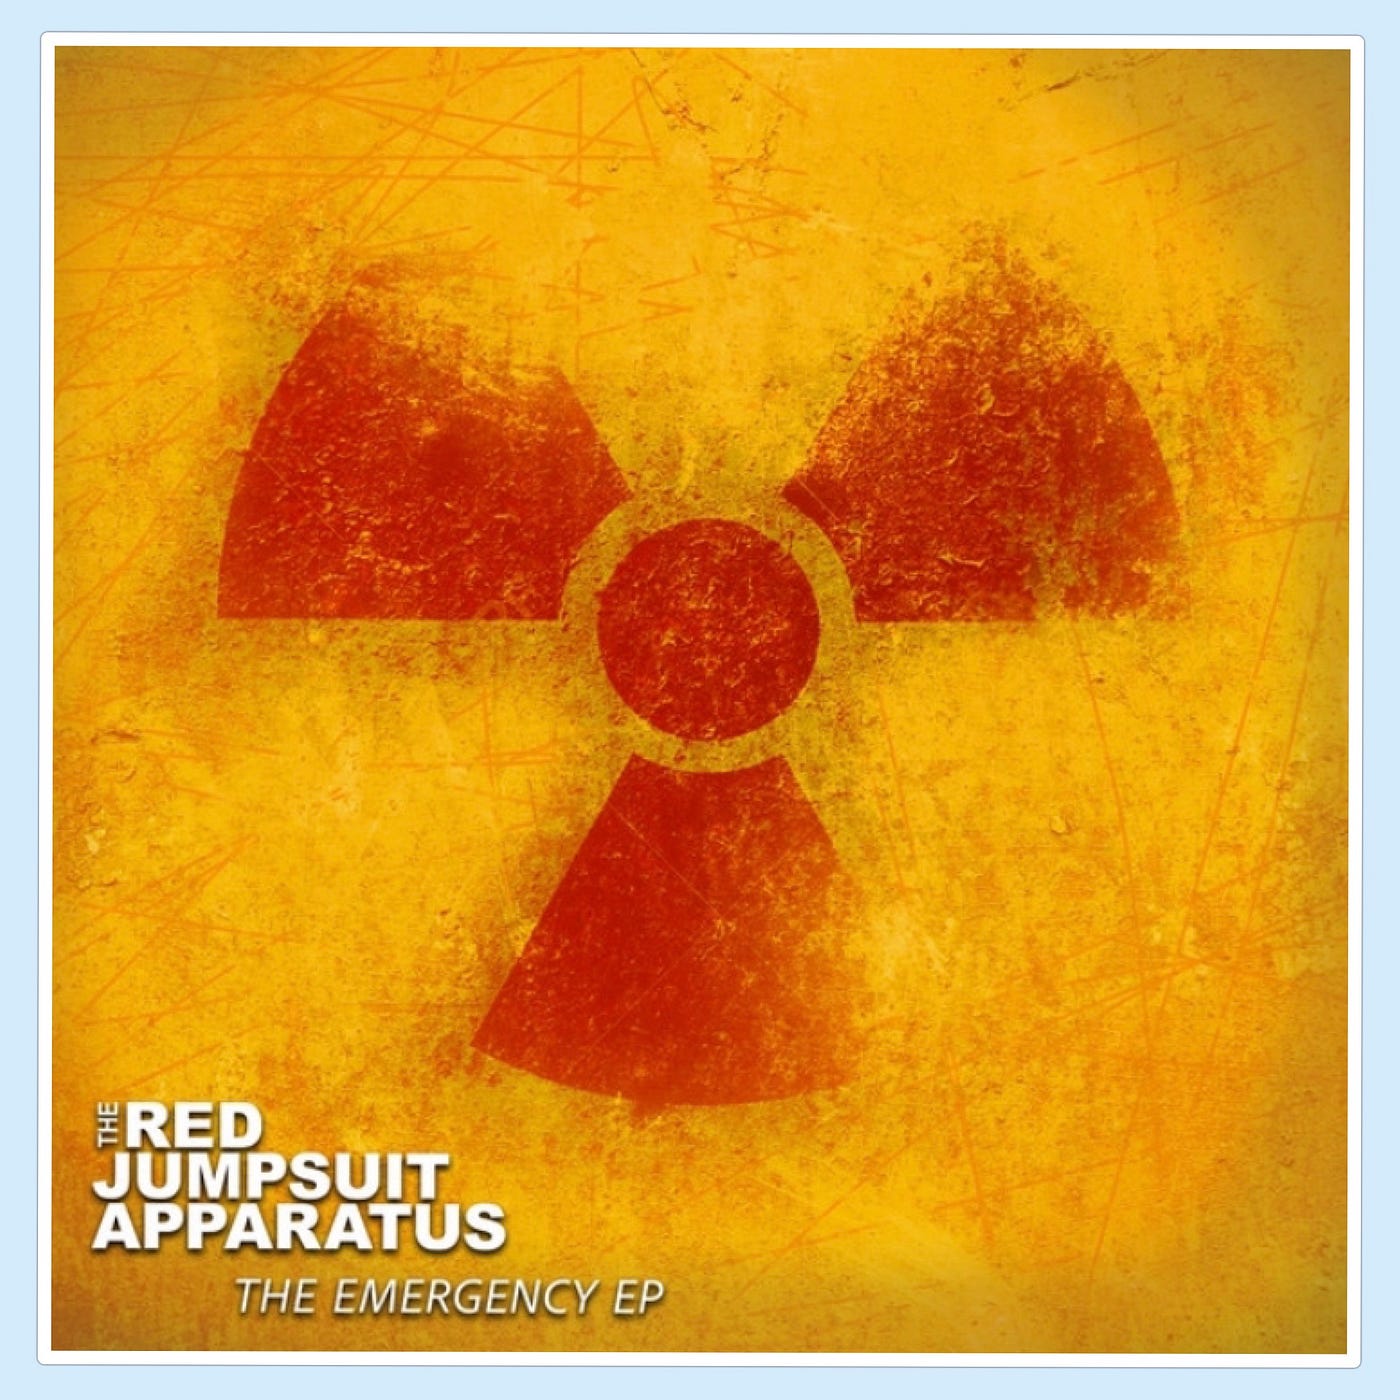 The Red Jumpsuit Apparatus The Emergency EP cover artwork